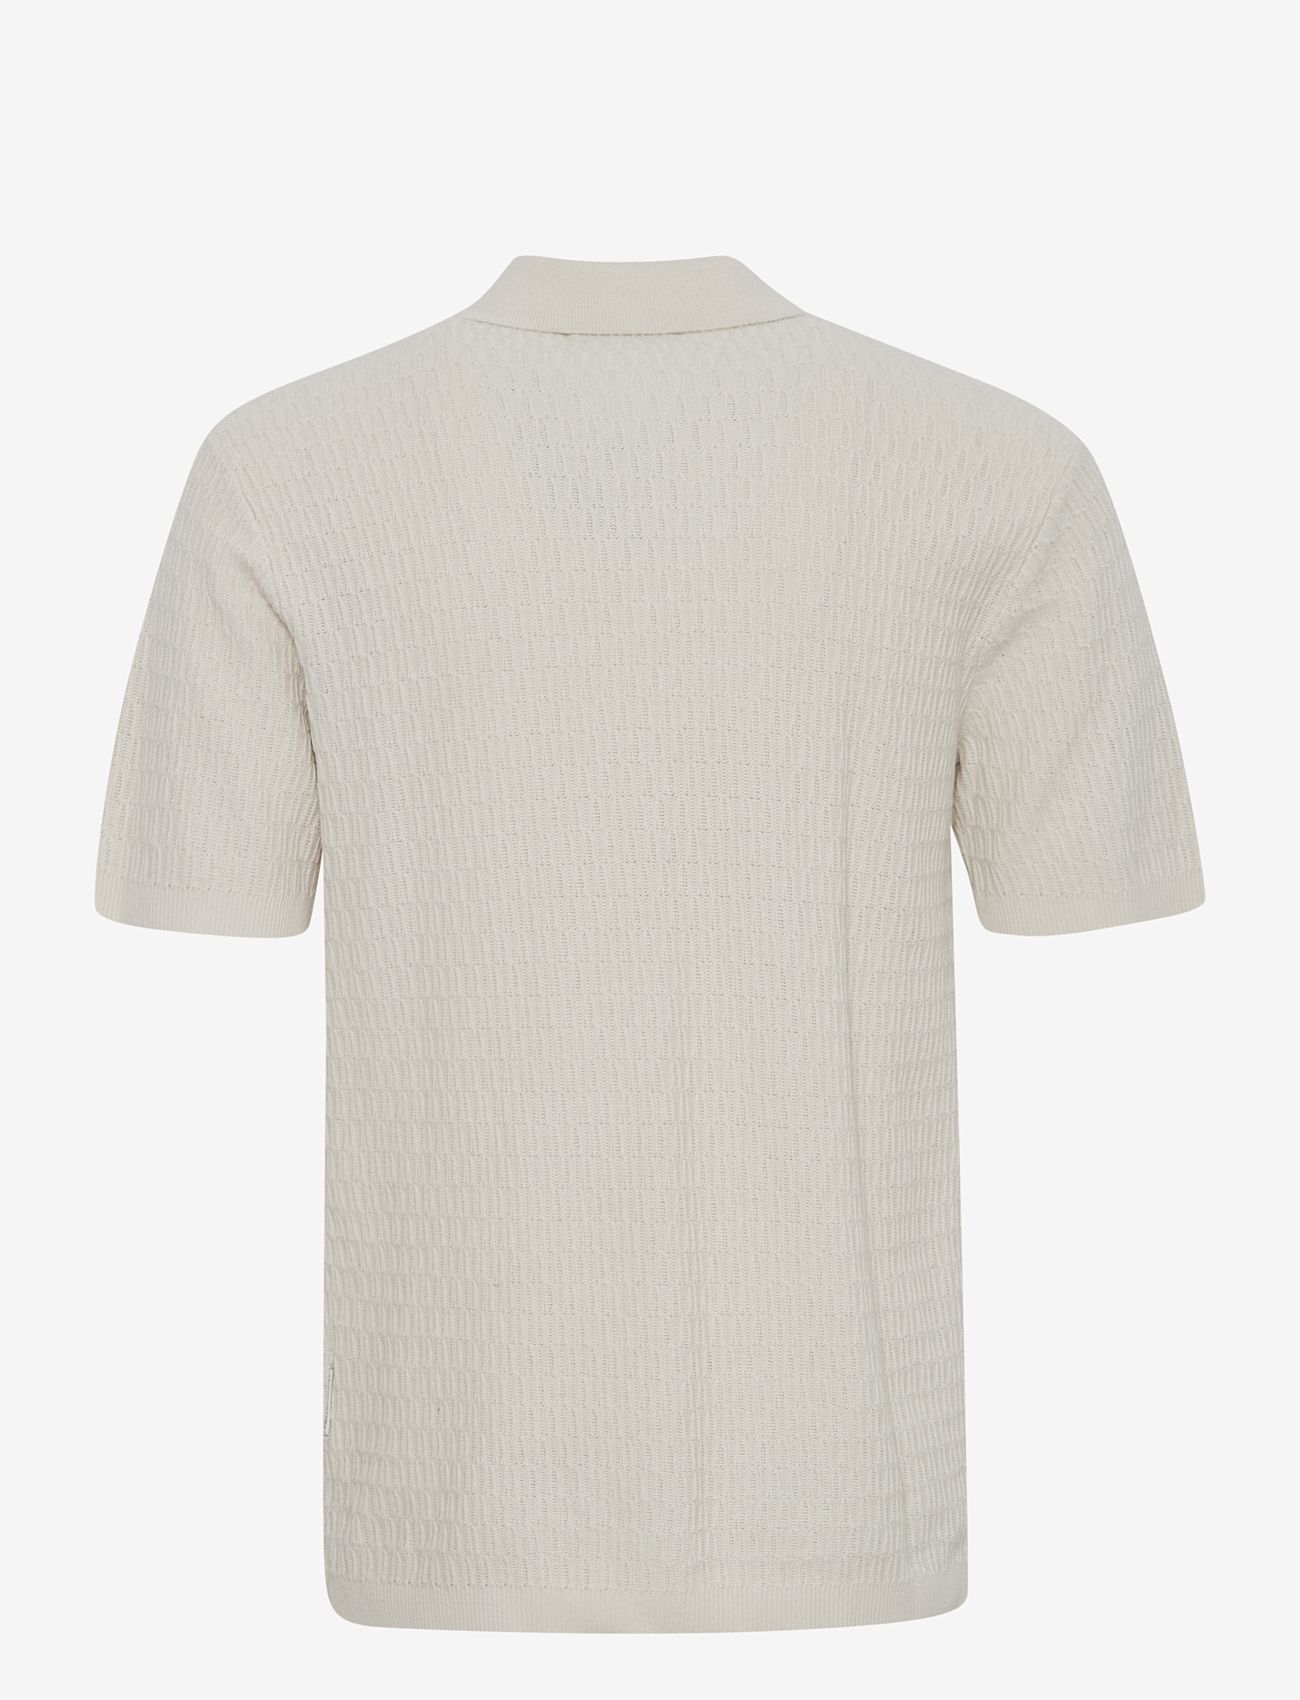 Casual Friday - CFKarl SS structured polo knit - herren - pumice stone - 1